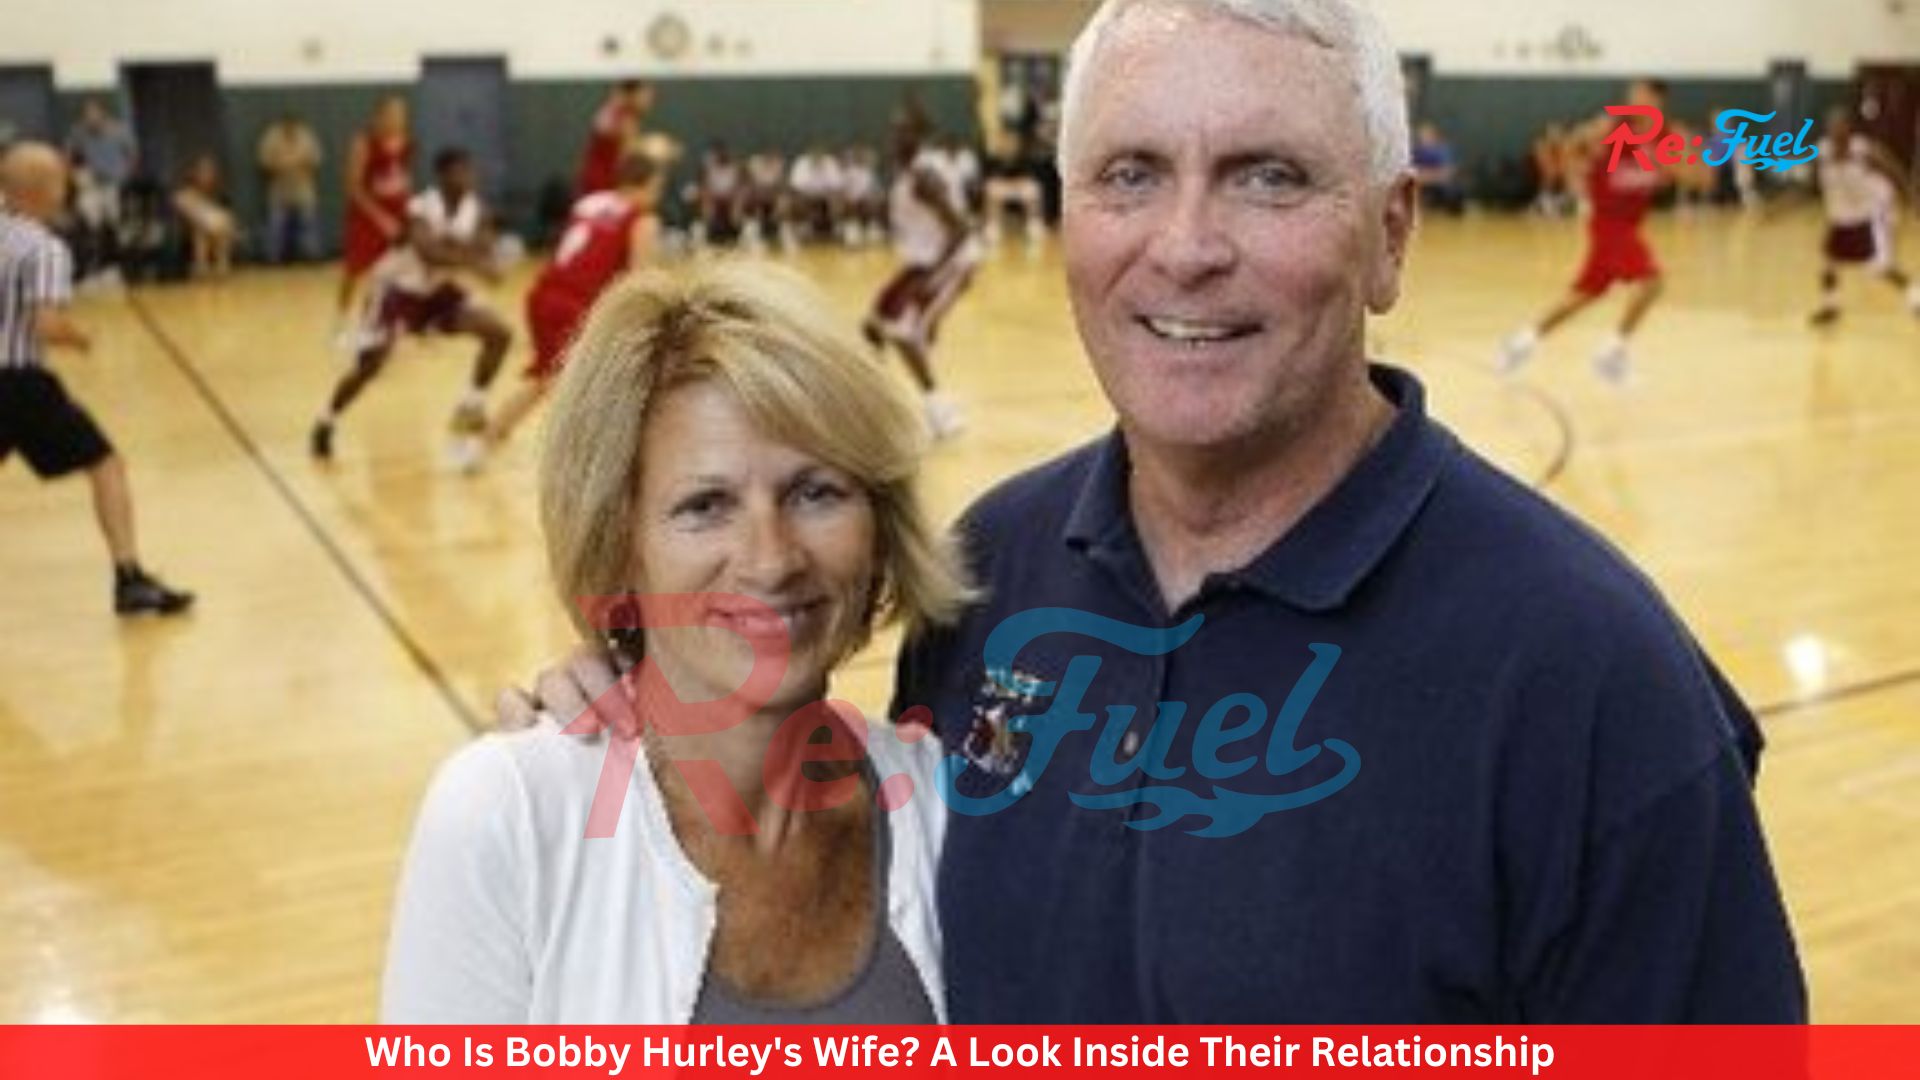 Who Is Bobby Hurley's Wife? A Look Inside Their Relationship